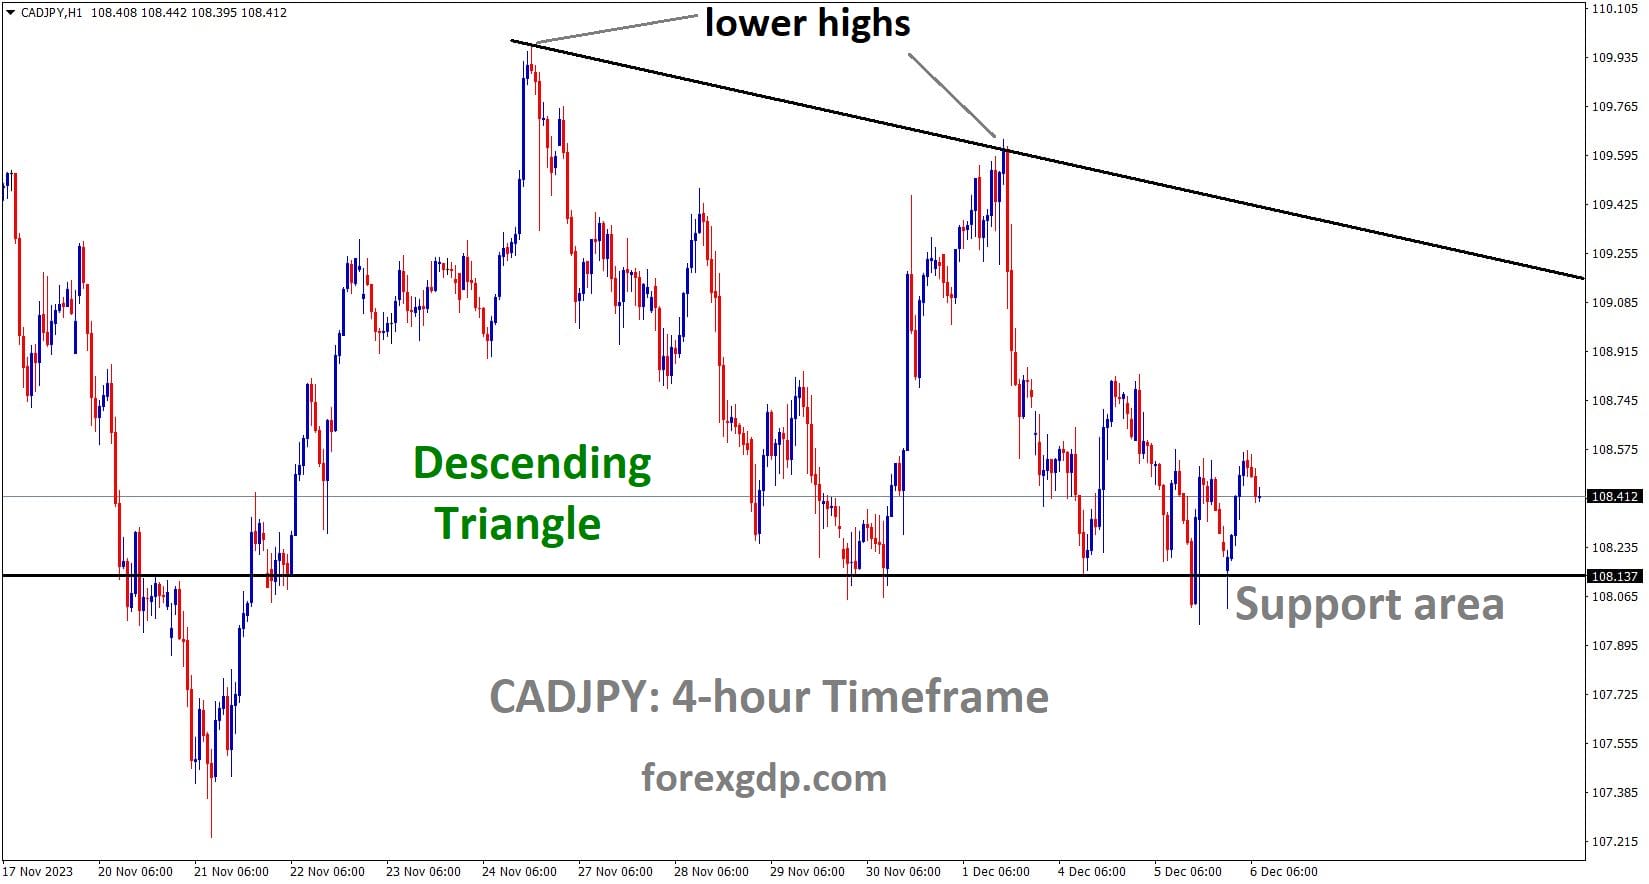 CADJPY is moving in the Descending triangle pattern and the market has rebounded from the support area of the pattern